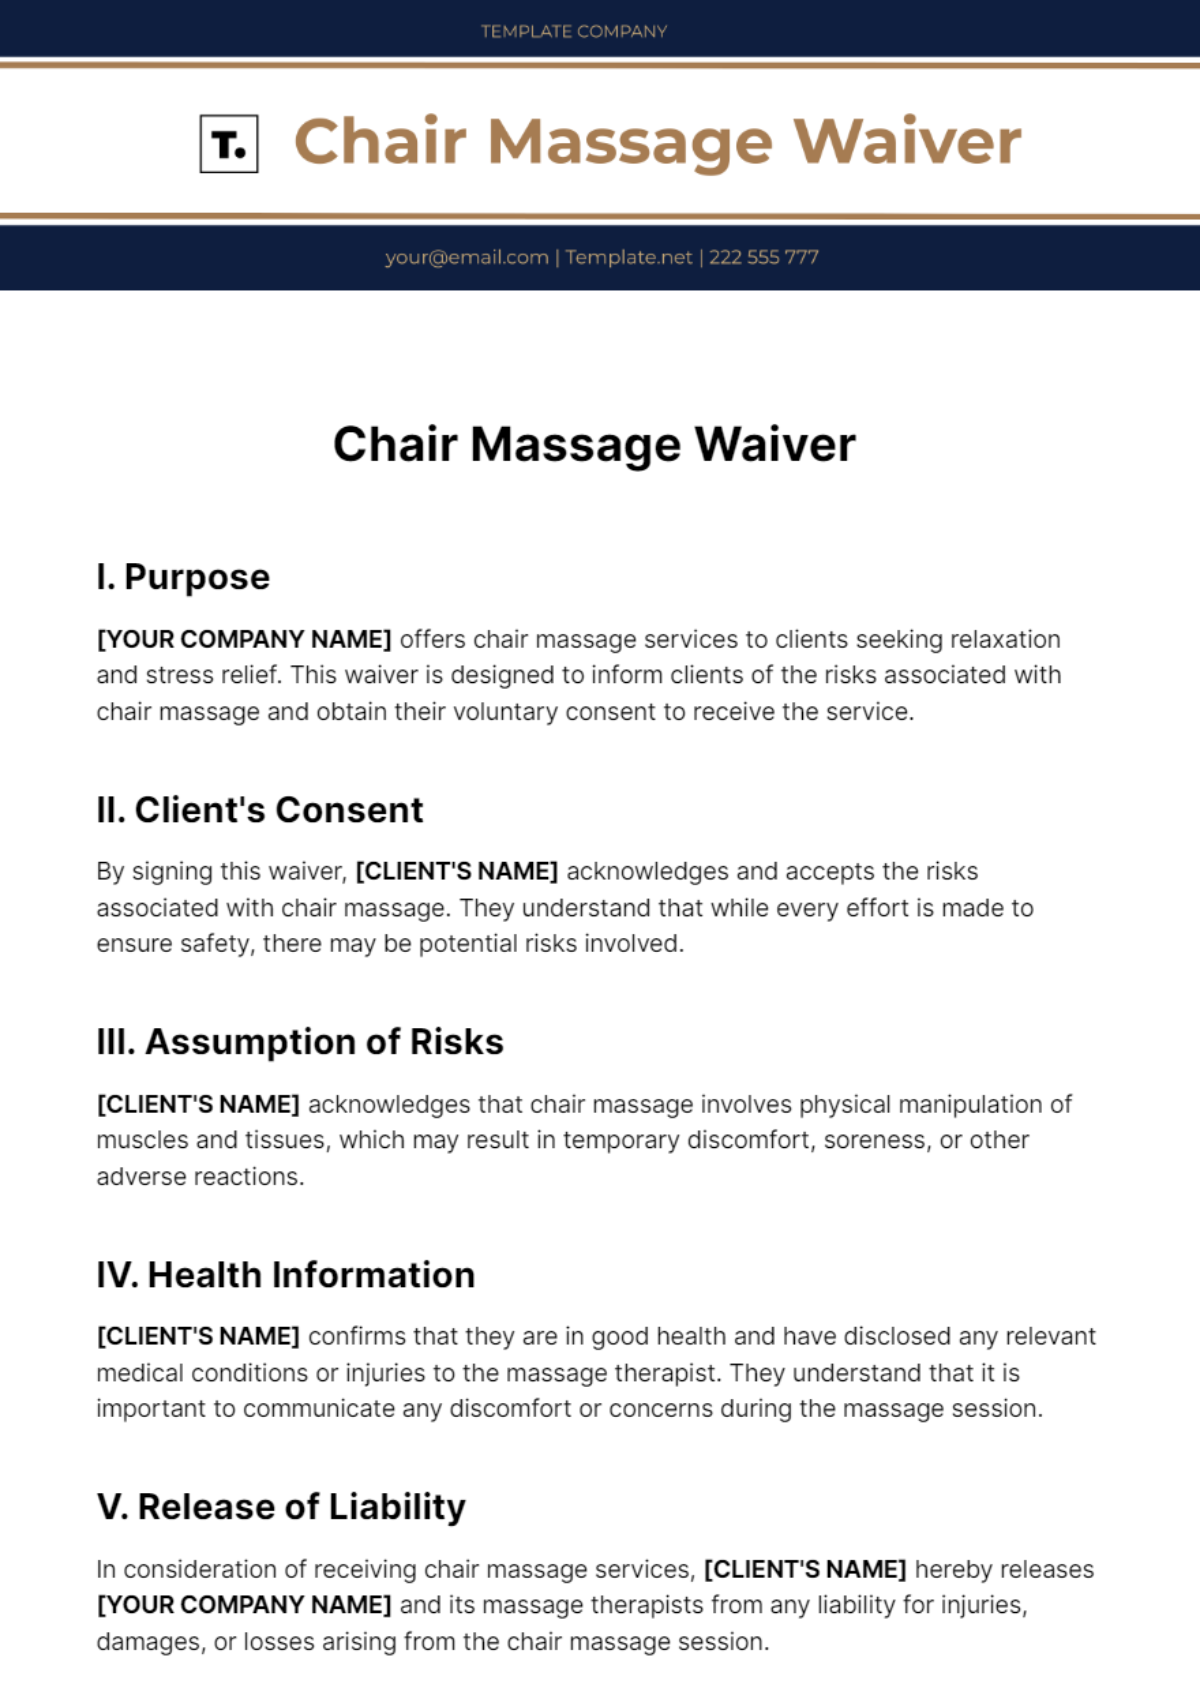 Chair Massage Waiver Template